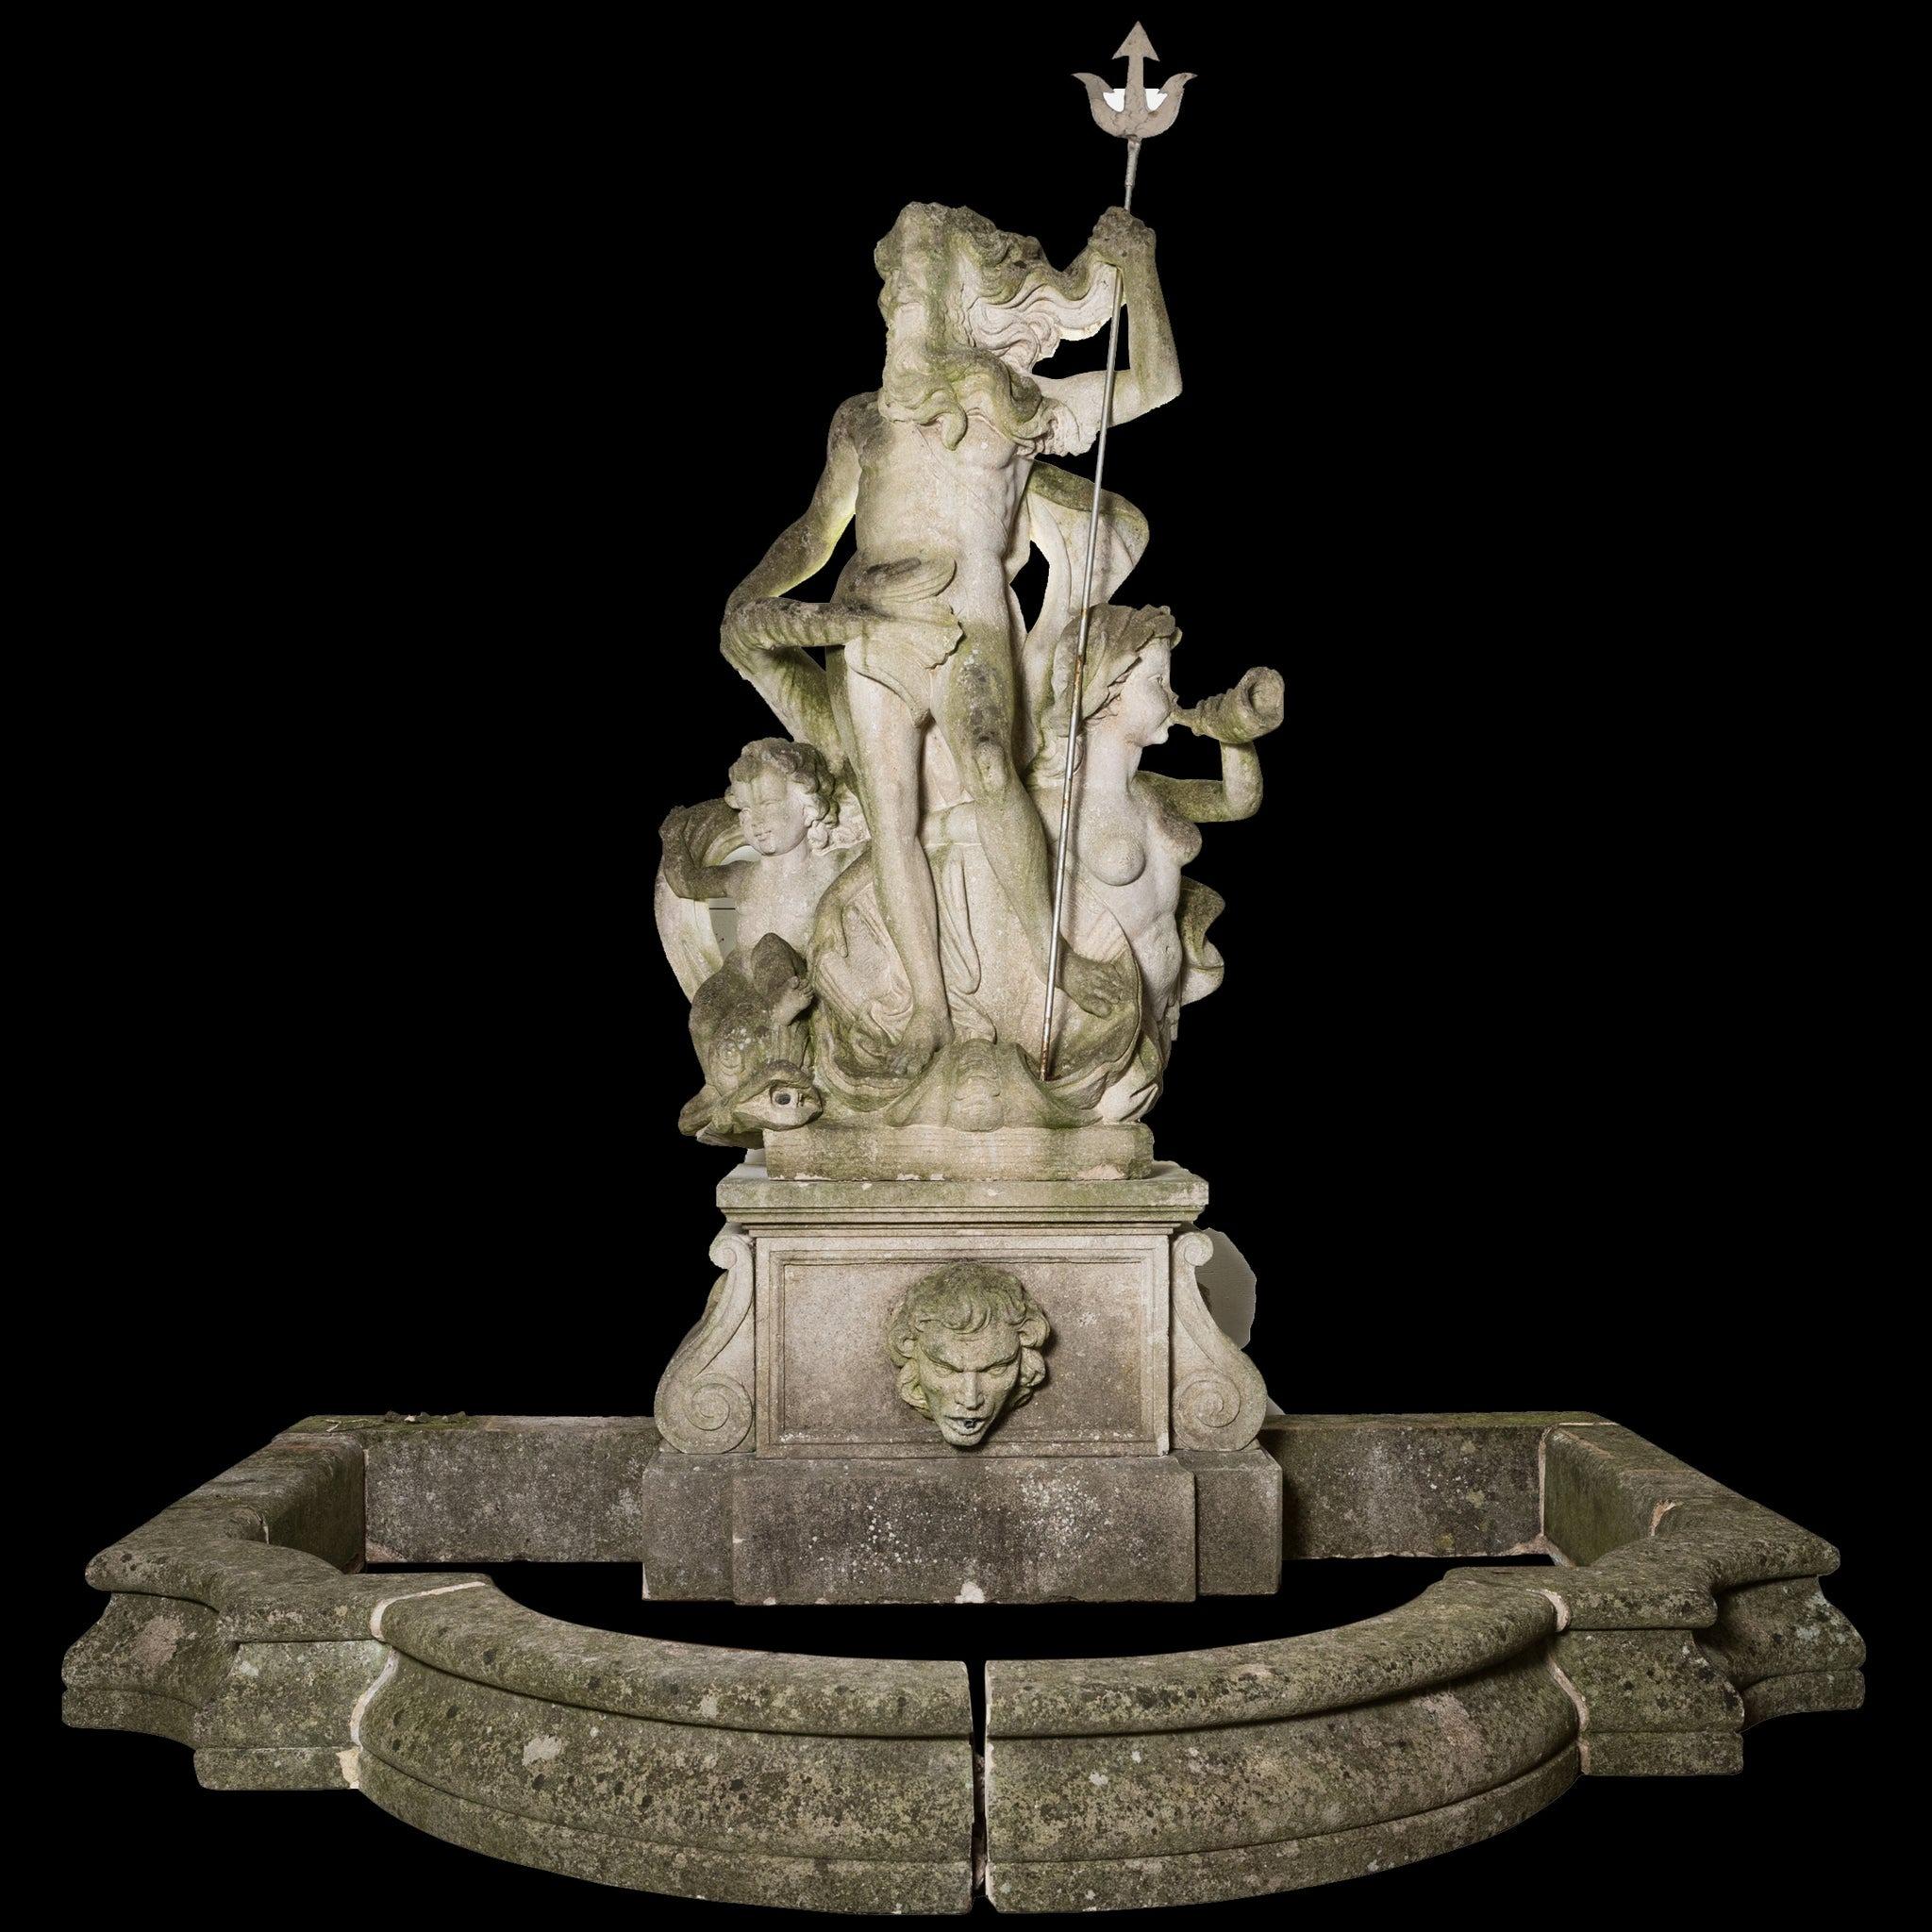 A truly spectacular piece, this Portland stone fountain provides an impressive garden feature.

A strong and daunting figure of Neptune dominates the centre gripping his trident, clearly conveying his control over the waters. Neptune, the god of the